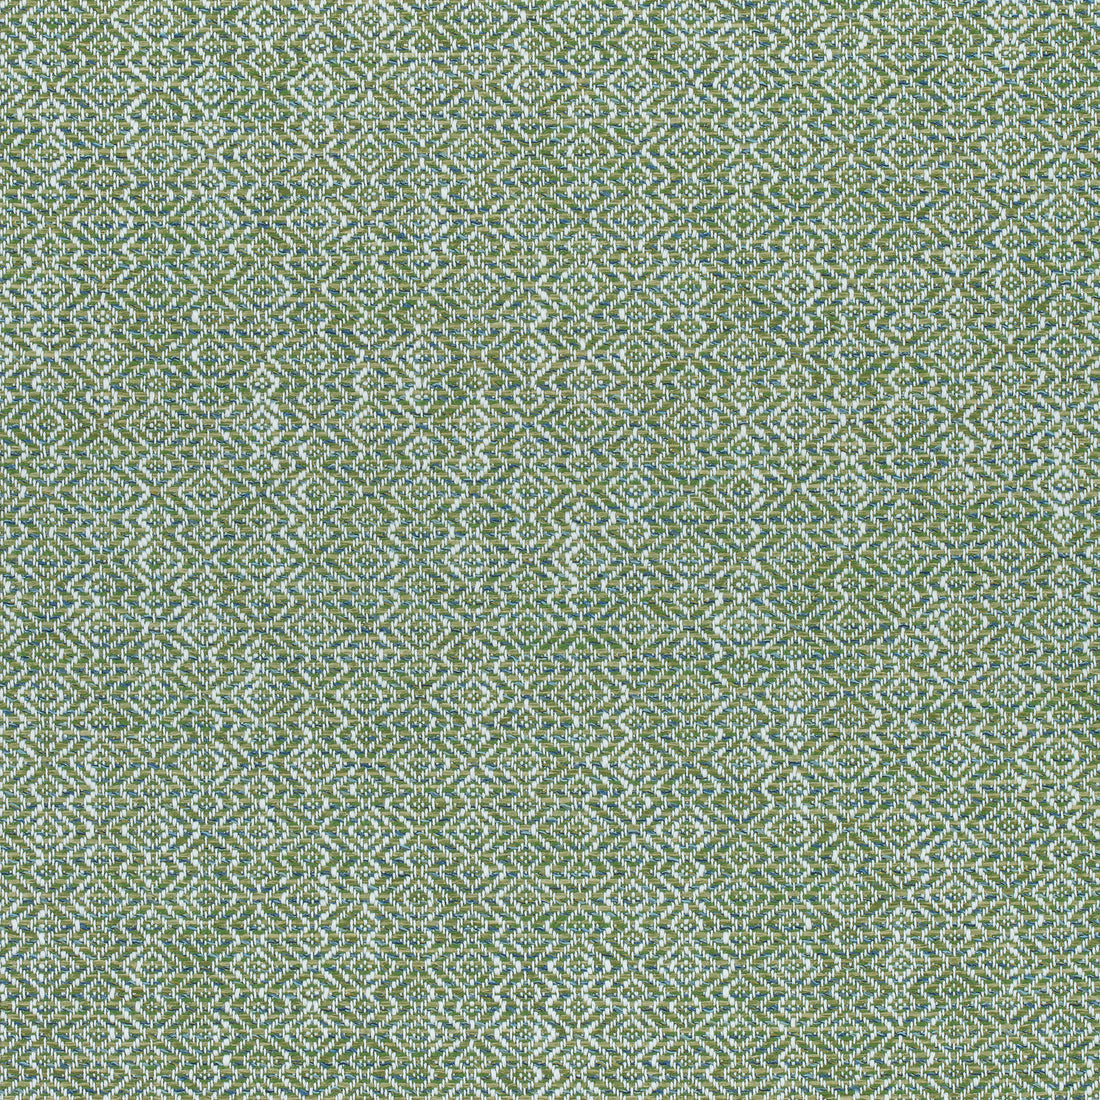 Kingsley fabric in grass color - pattern number W74068 - by Thibaut in the Cadence collection